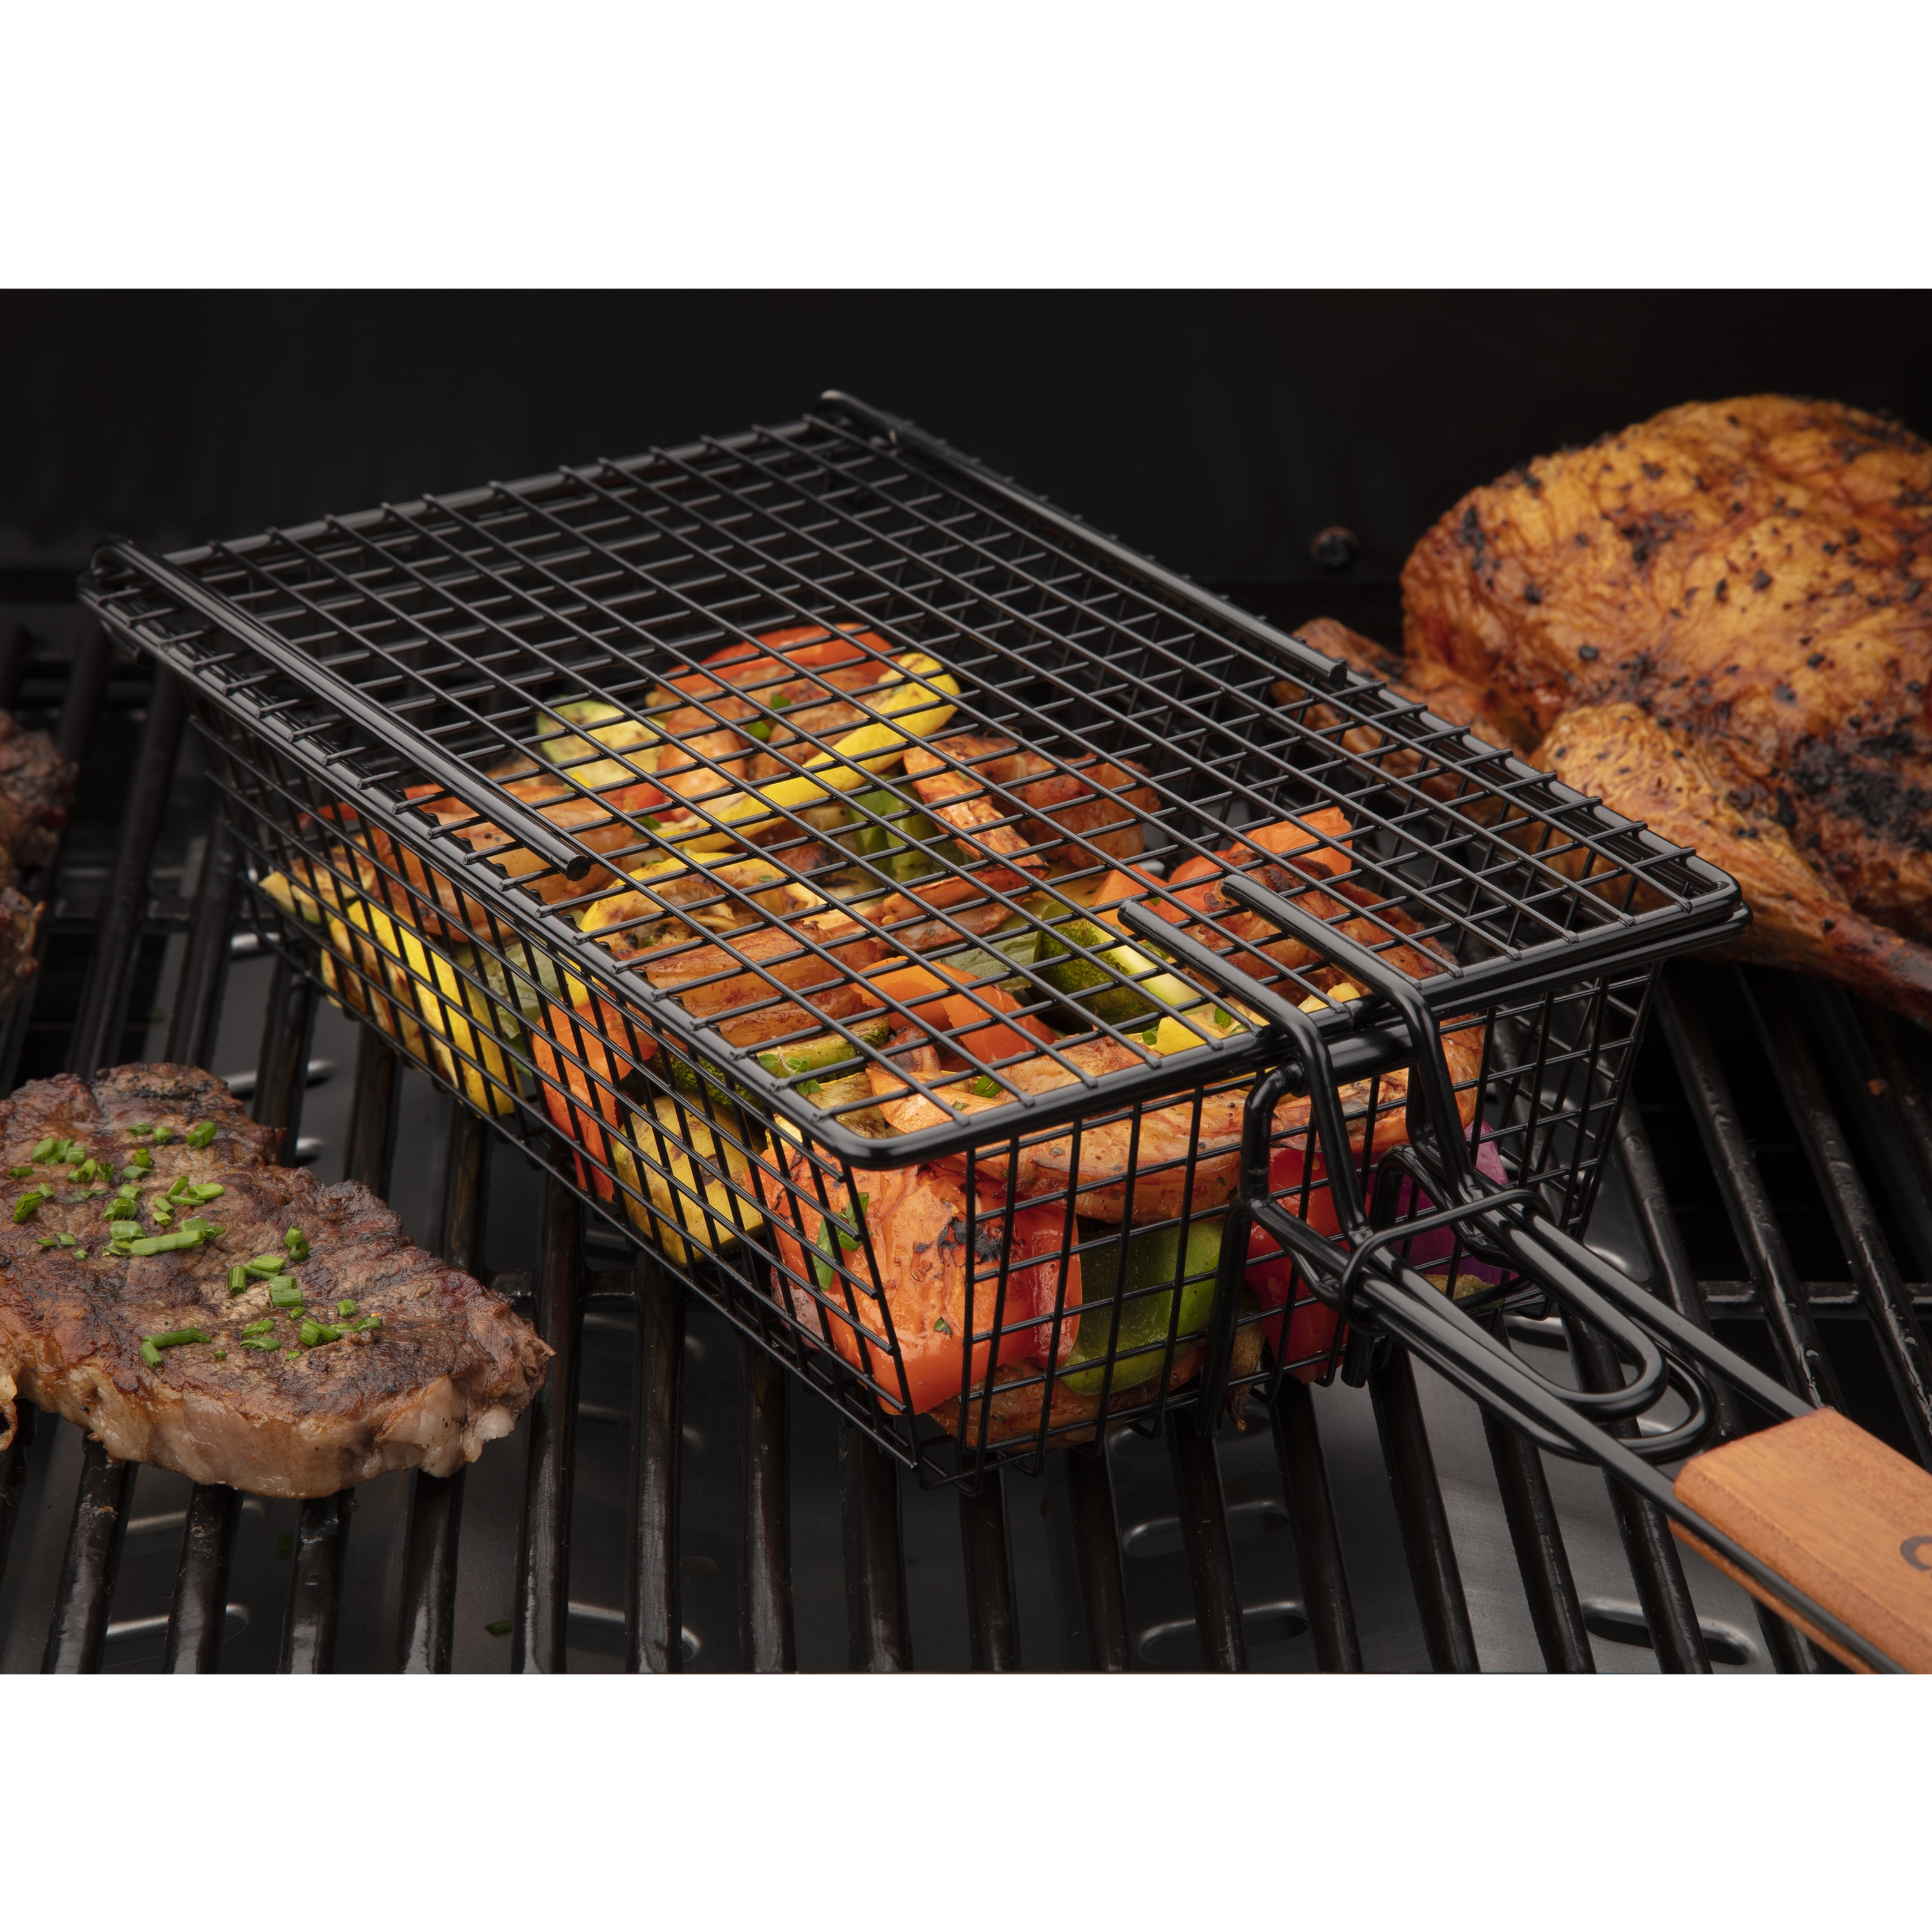 Non-Stick Grilling Basket With Folding Handle